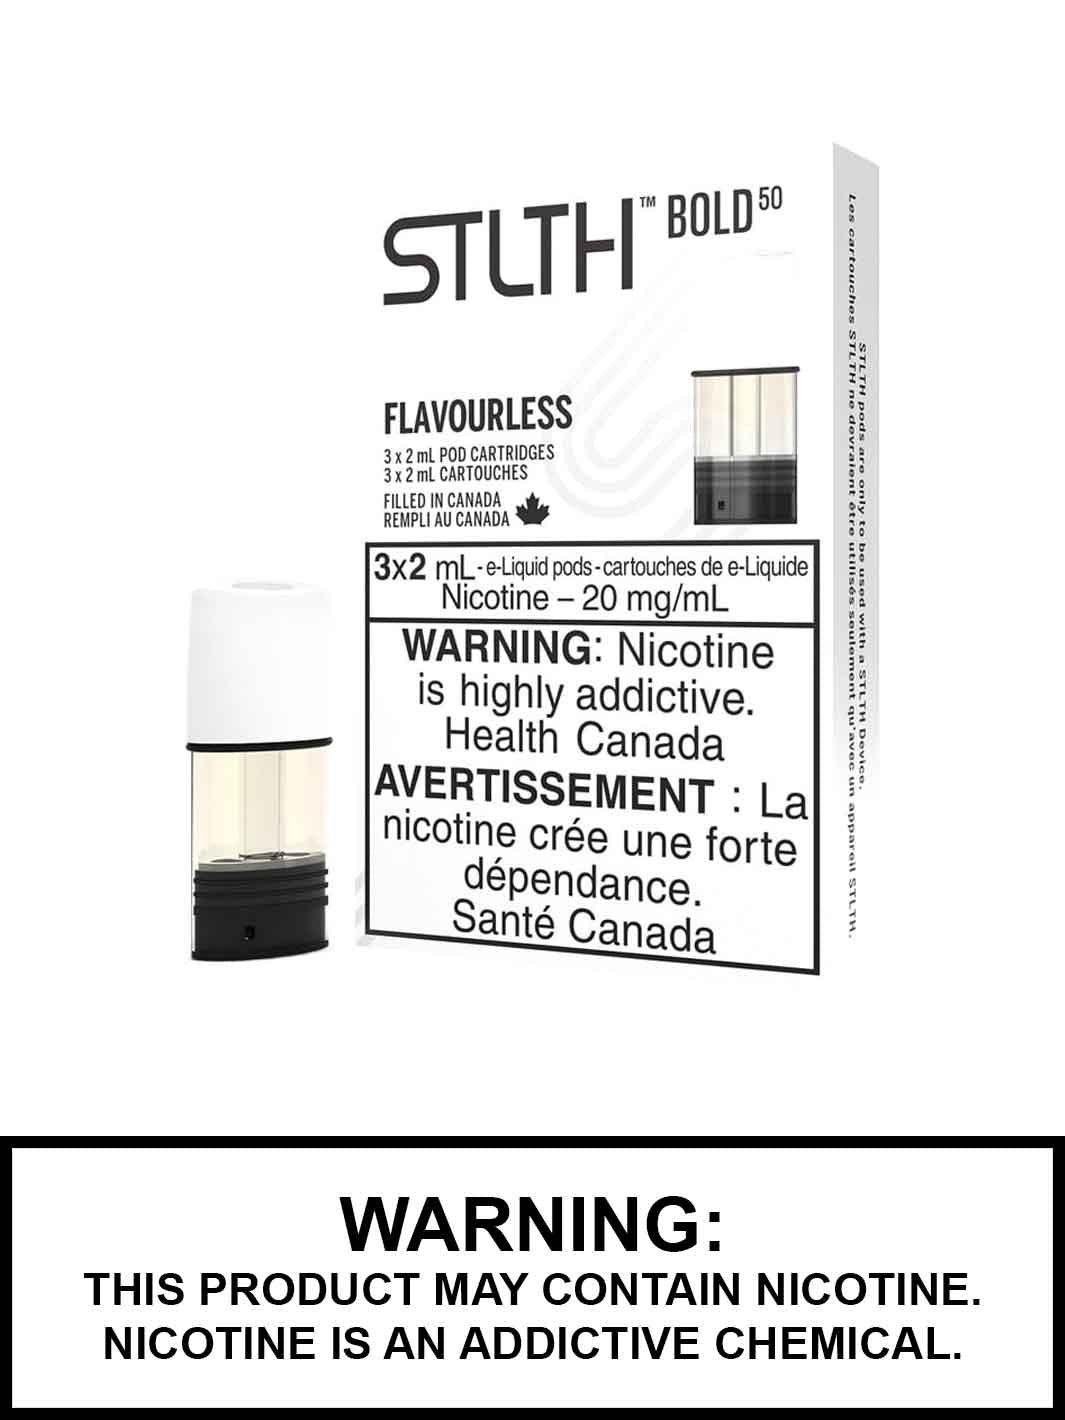 Flavourless Bold 50 STLTH Pods Canada, Flavourless eJuice, Vape360